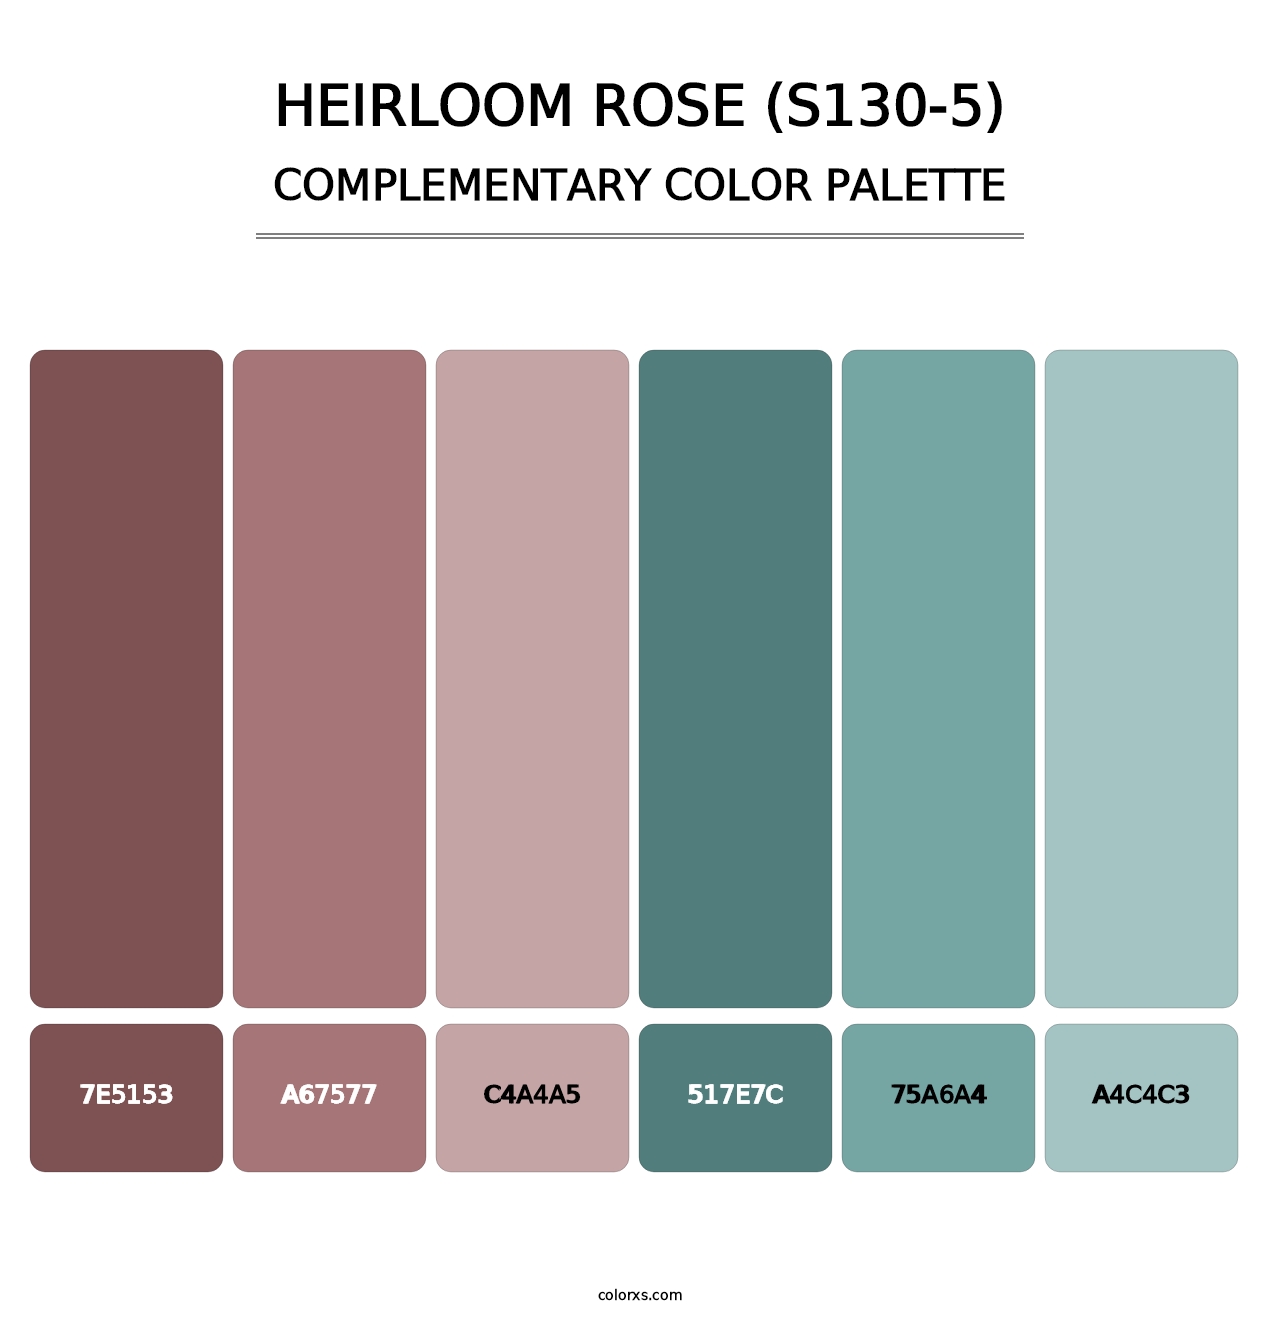 Heirloom Rose (S130-5) - Complementary Color Palette